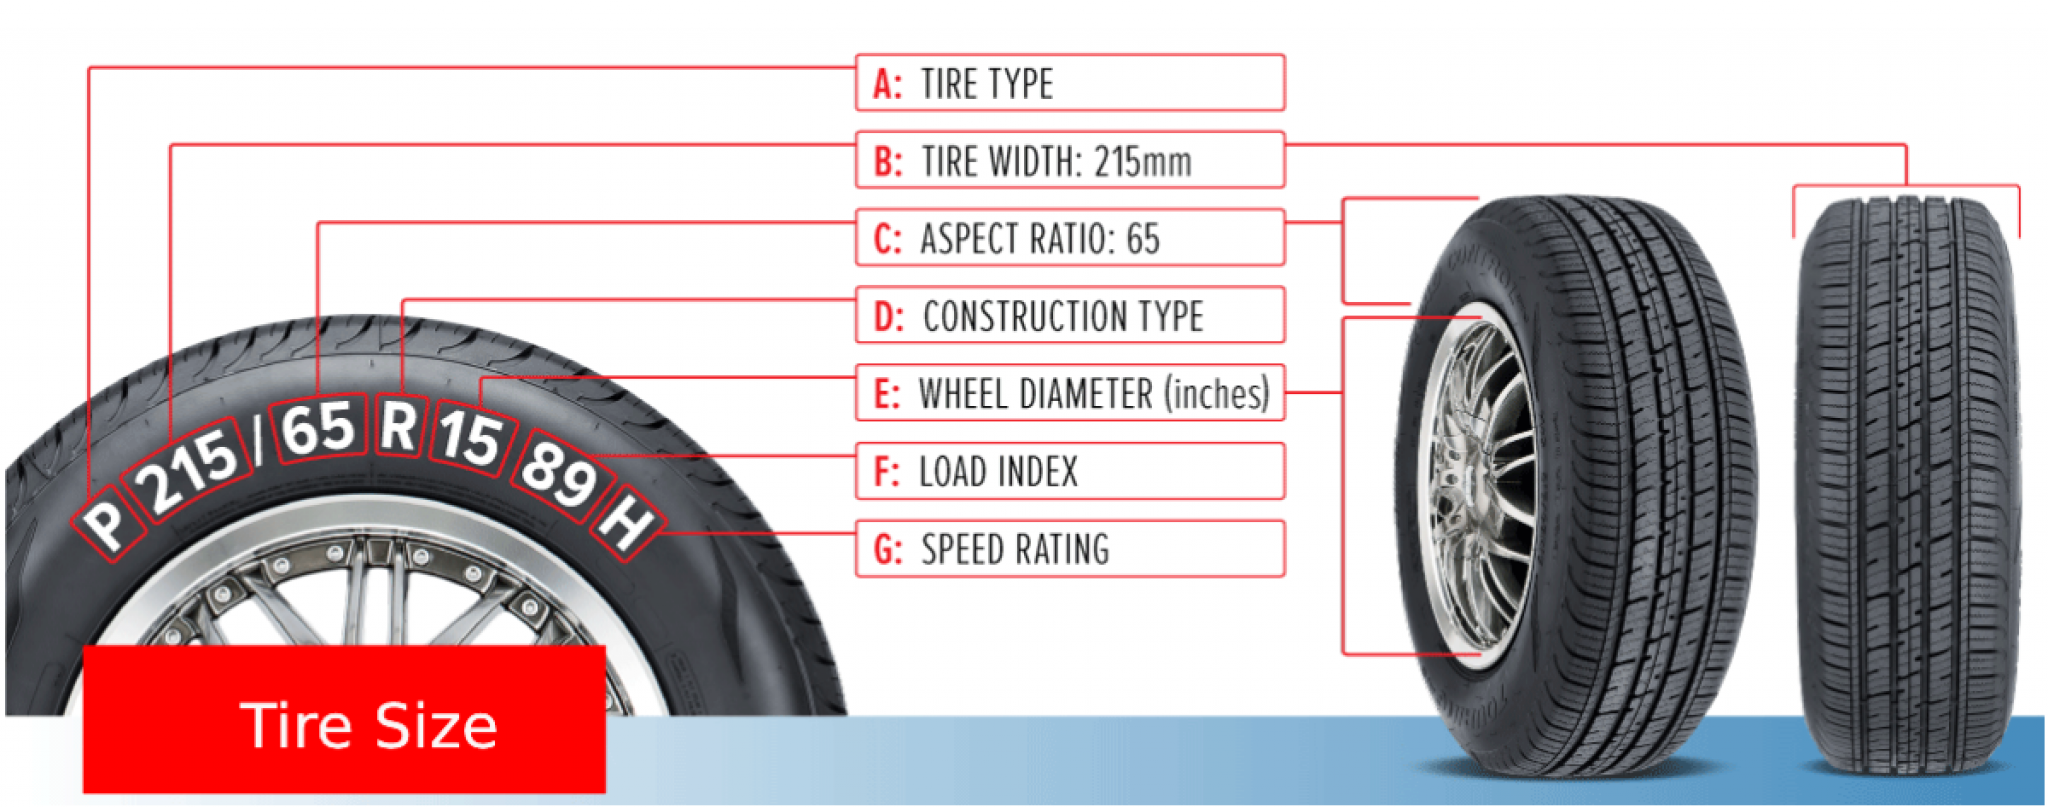 tires size